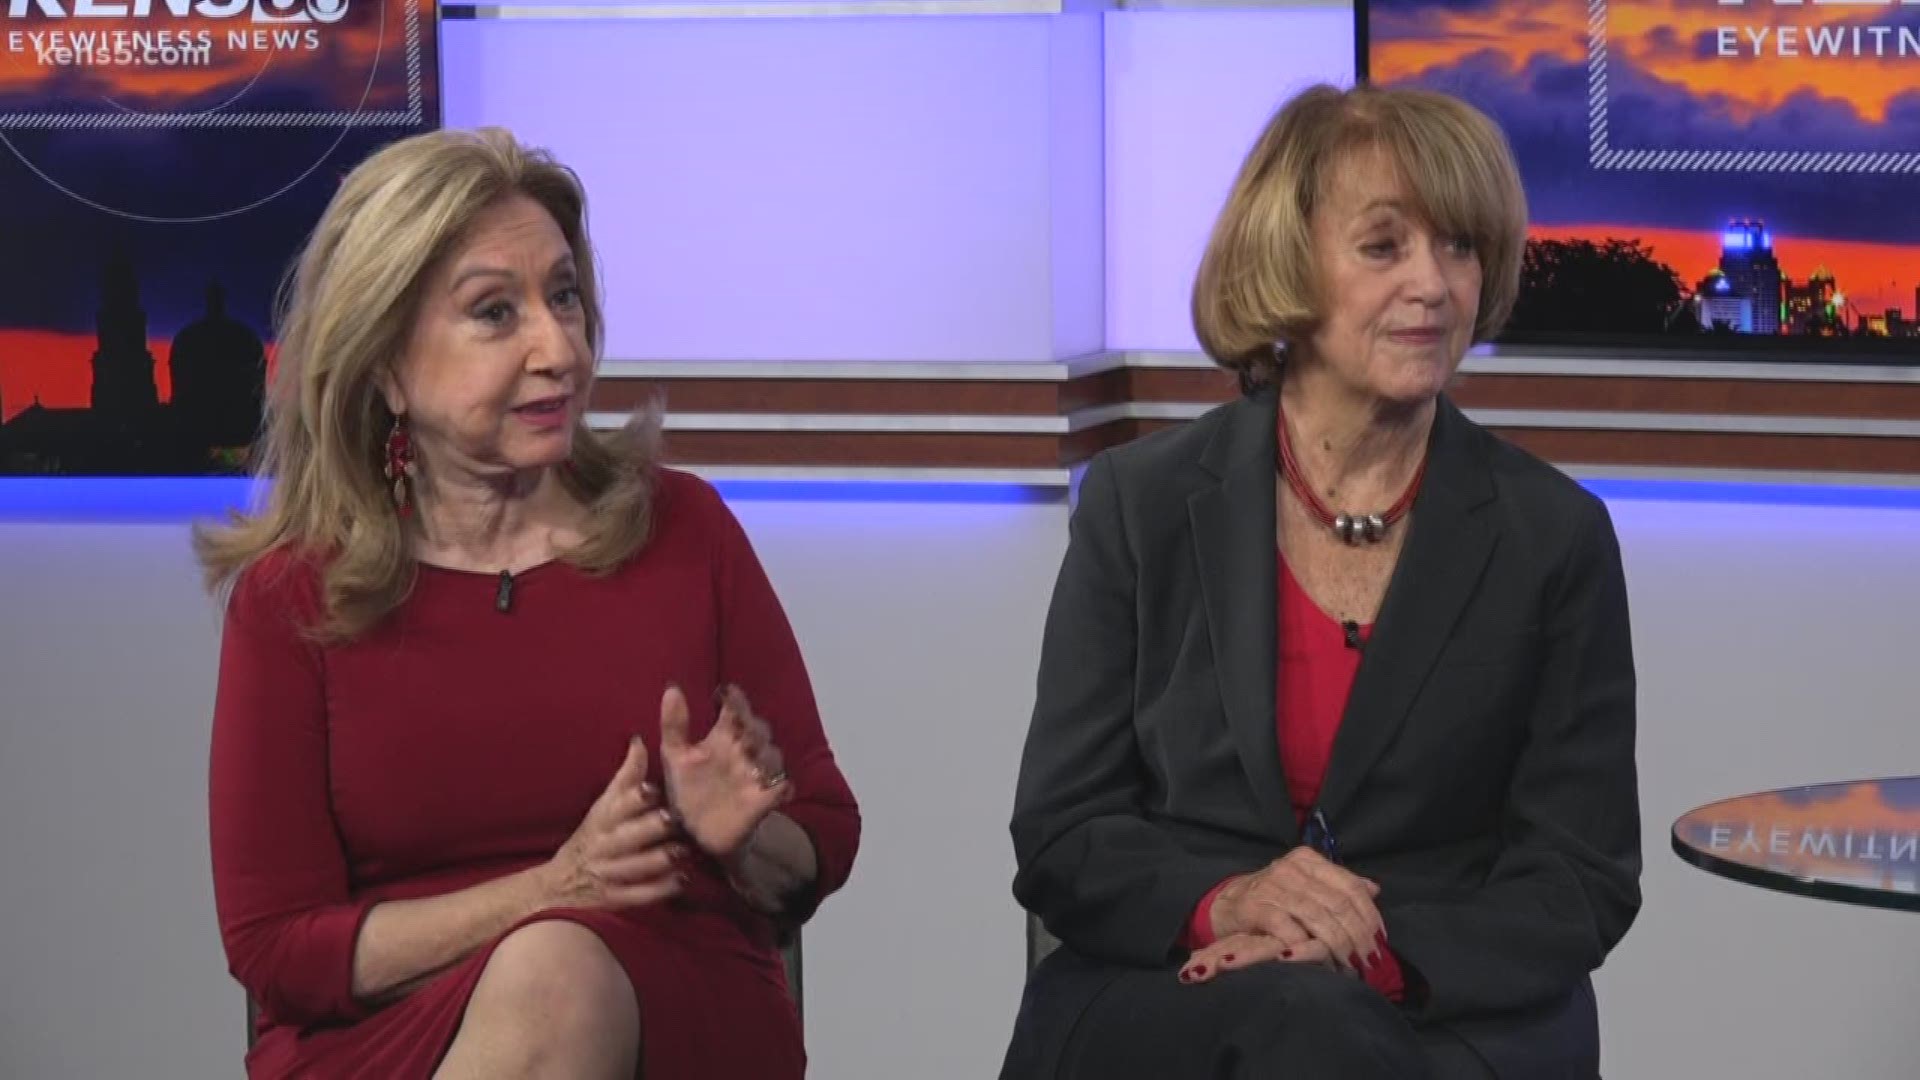 November 10 is the Constellation of Stars Gala. They're honoring several people, including Southwest Airlines pilot Tammie Jo Shults. Joining us this morning are Dr. Susan Blackwood with the Women's Chamber of Commerce and Martha Tijerina, former star hon